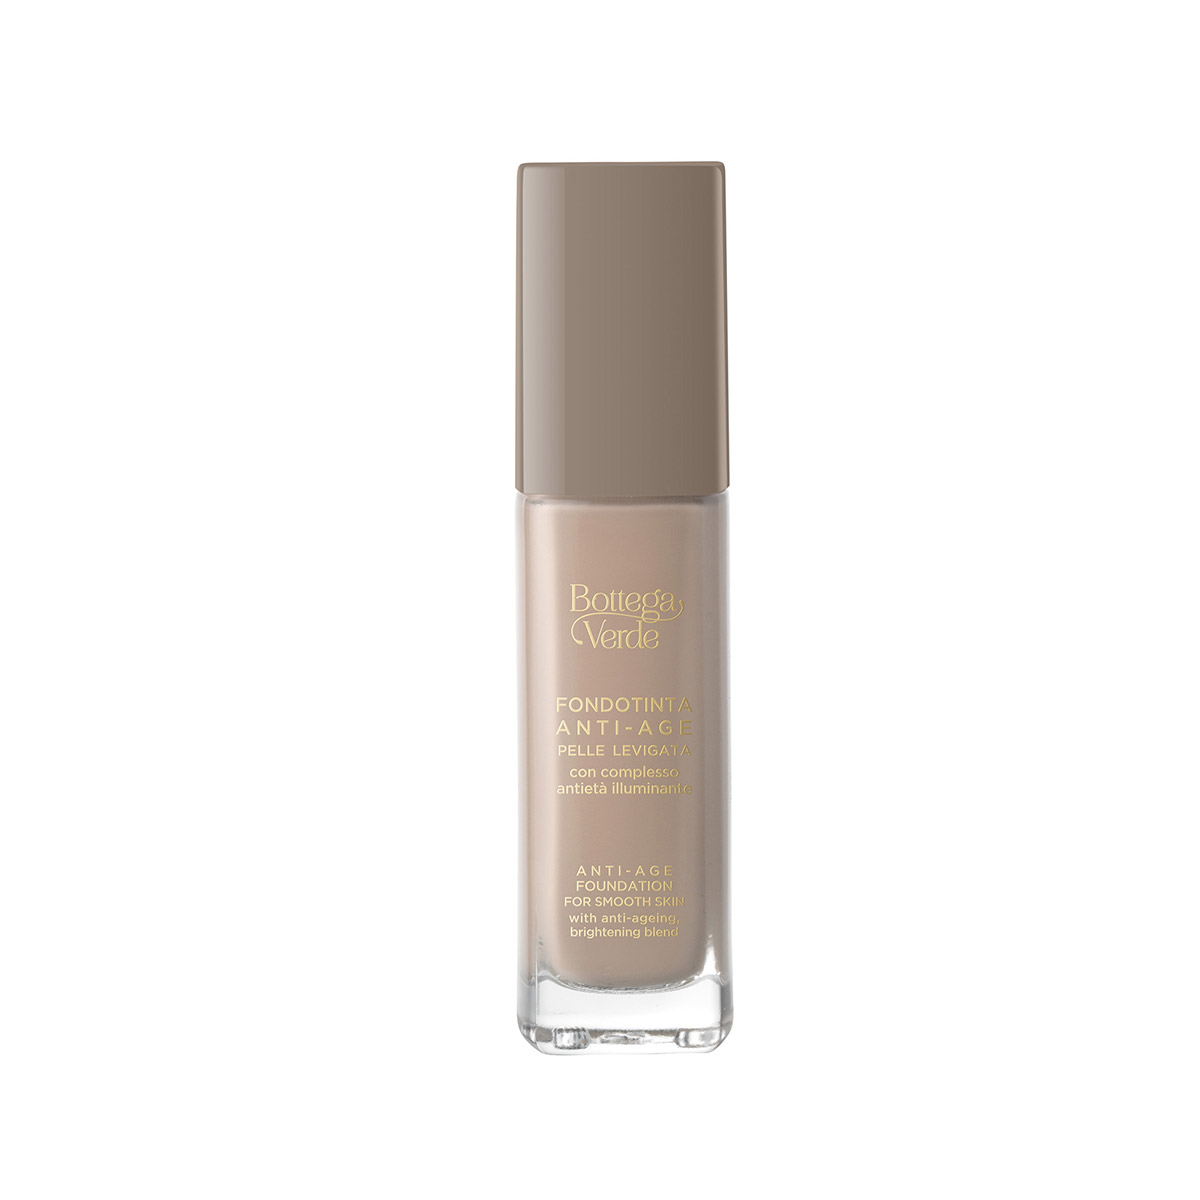 Anti-ageing foundation for smooth skin, with an anti-ageing, brightening blend (30 ml)